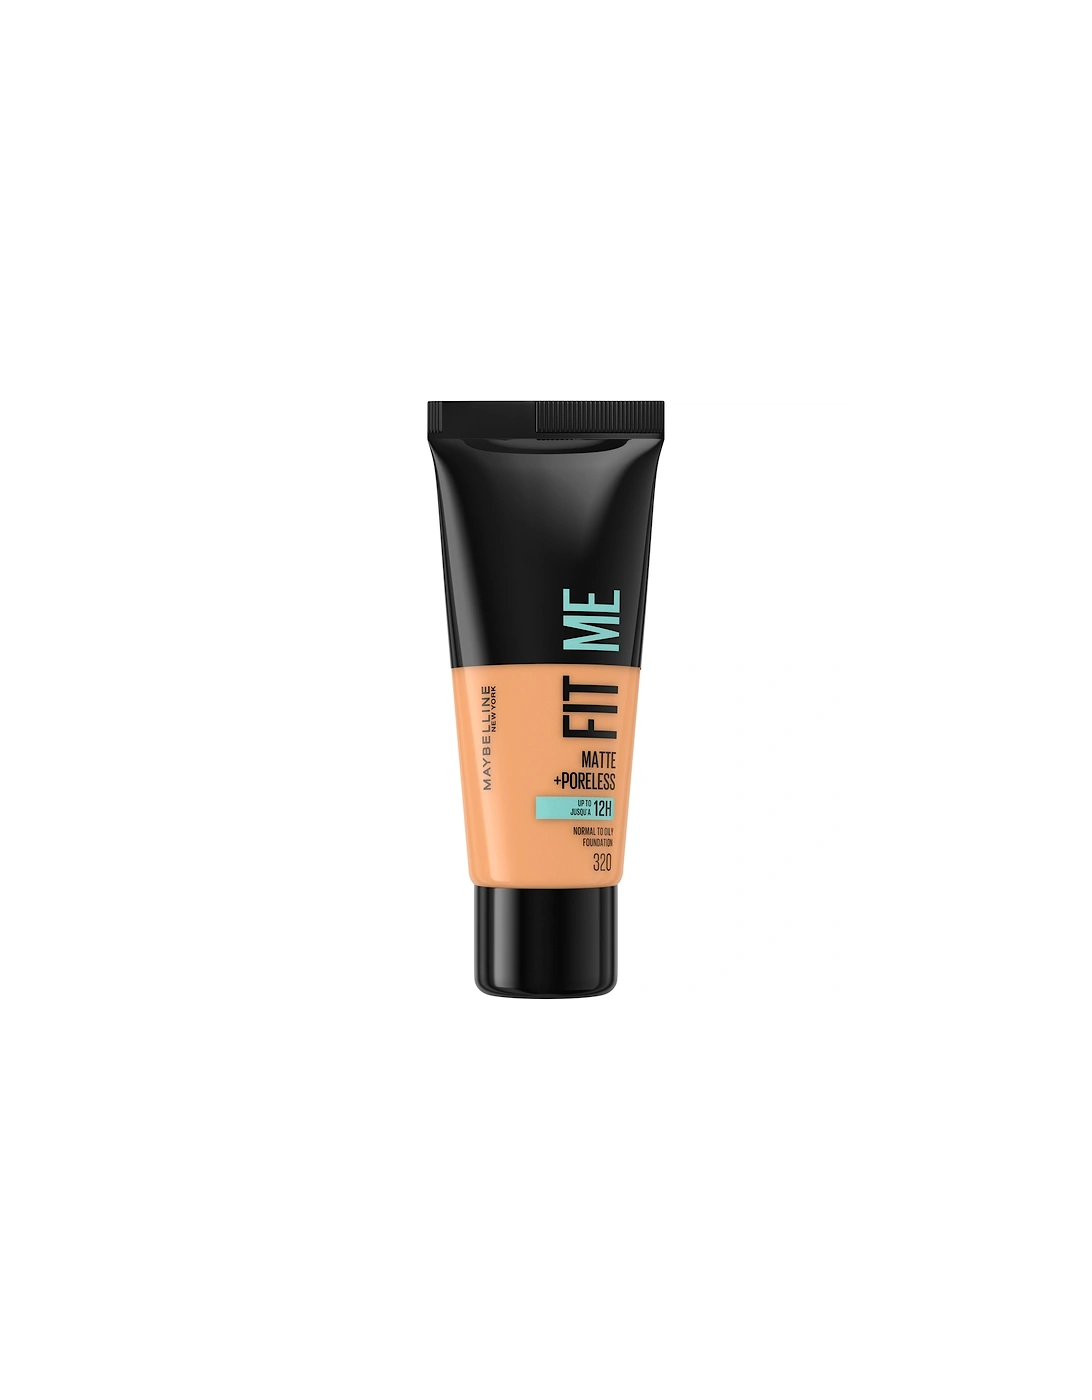 Fit Me! Matte and Poreless Foundation - 320 Natural Tan - - Fit Me! Matte and Poreless Foundation 30ml (Various Shades) - Foundation - Fit Me! Matte and Poreless Foundation 30ml (Various Shades) - Tina - Fit Me! Matte and Poreless Foundation 30ml (Various Shades) - Jo, 2 of 1